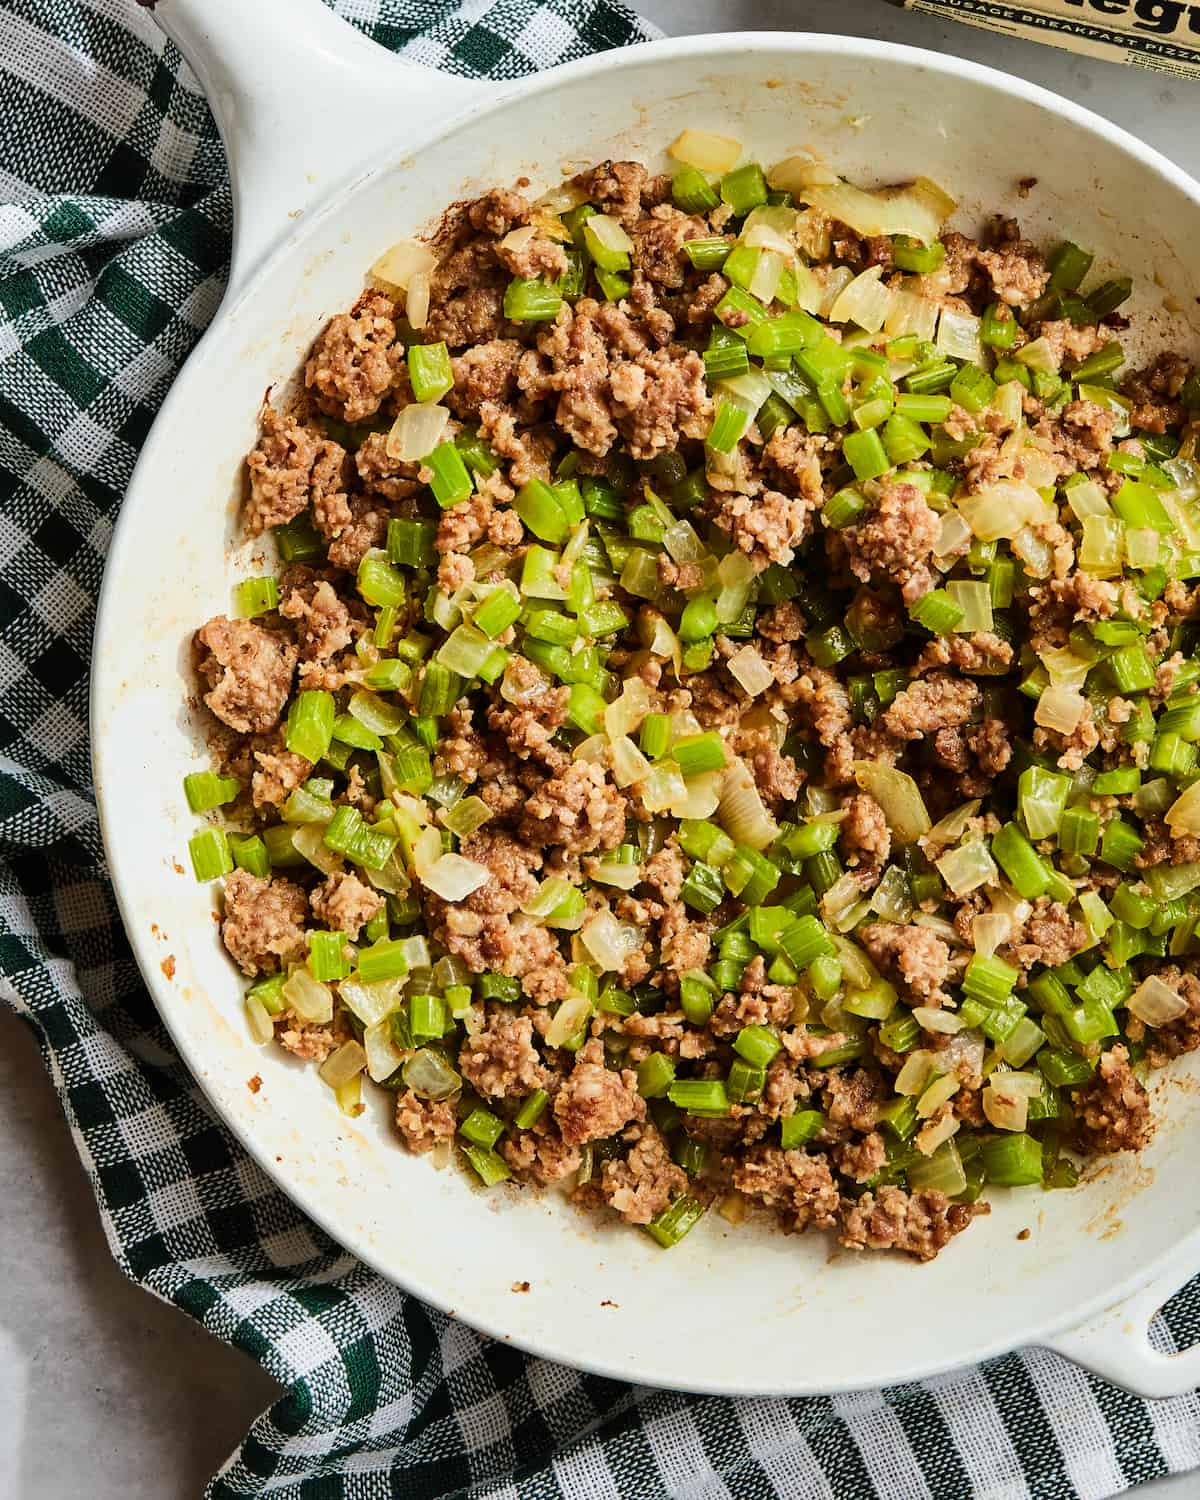 A white pan with ground sausage, celery and onion cooked together placed on a kitchen towel.